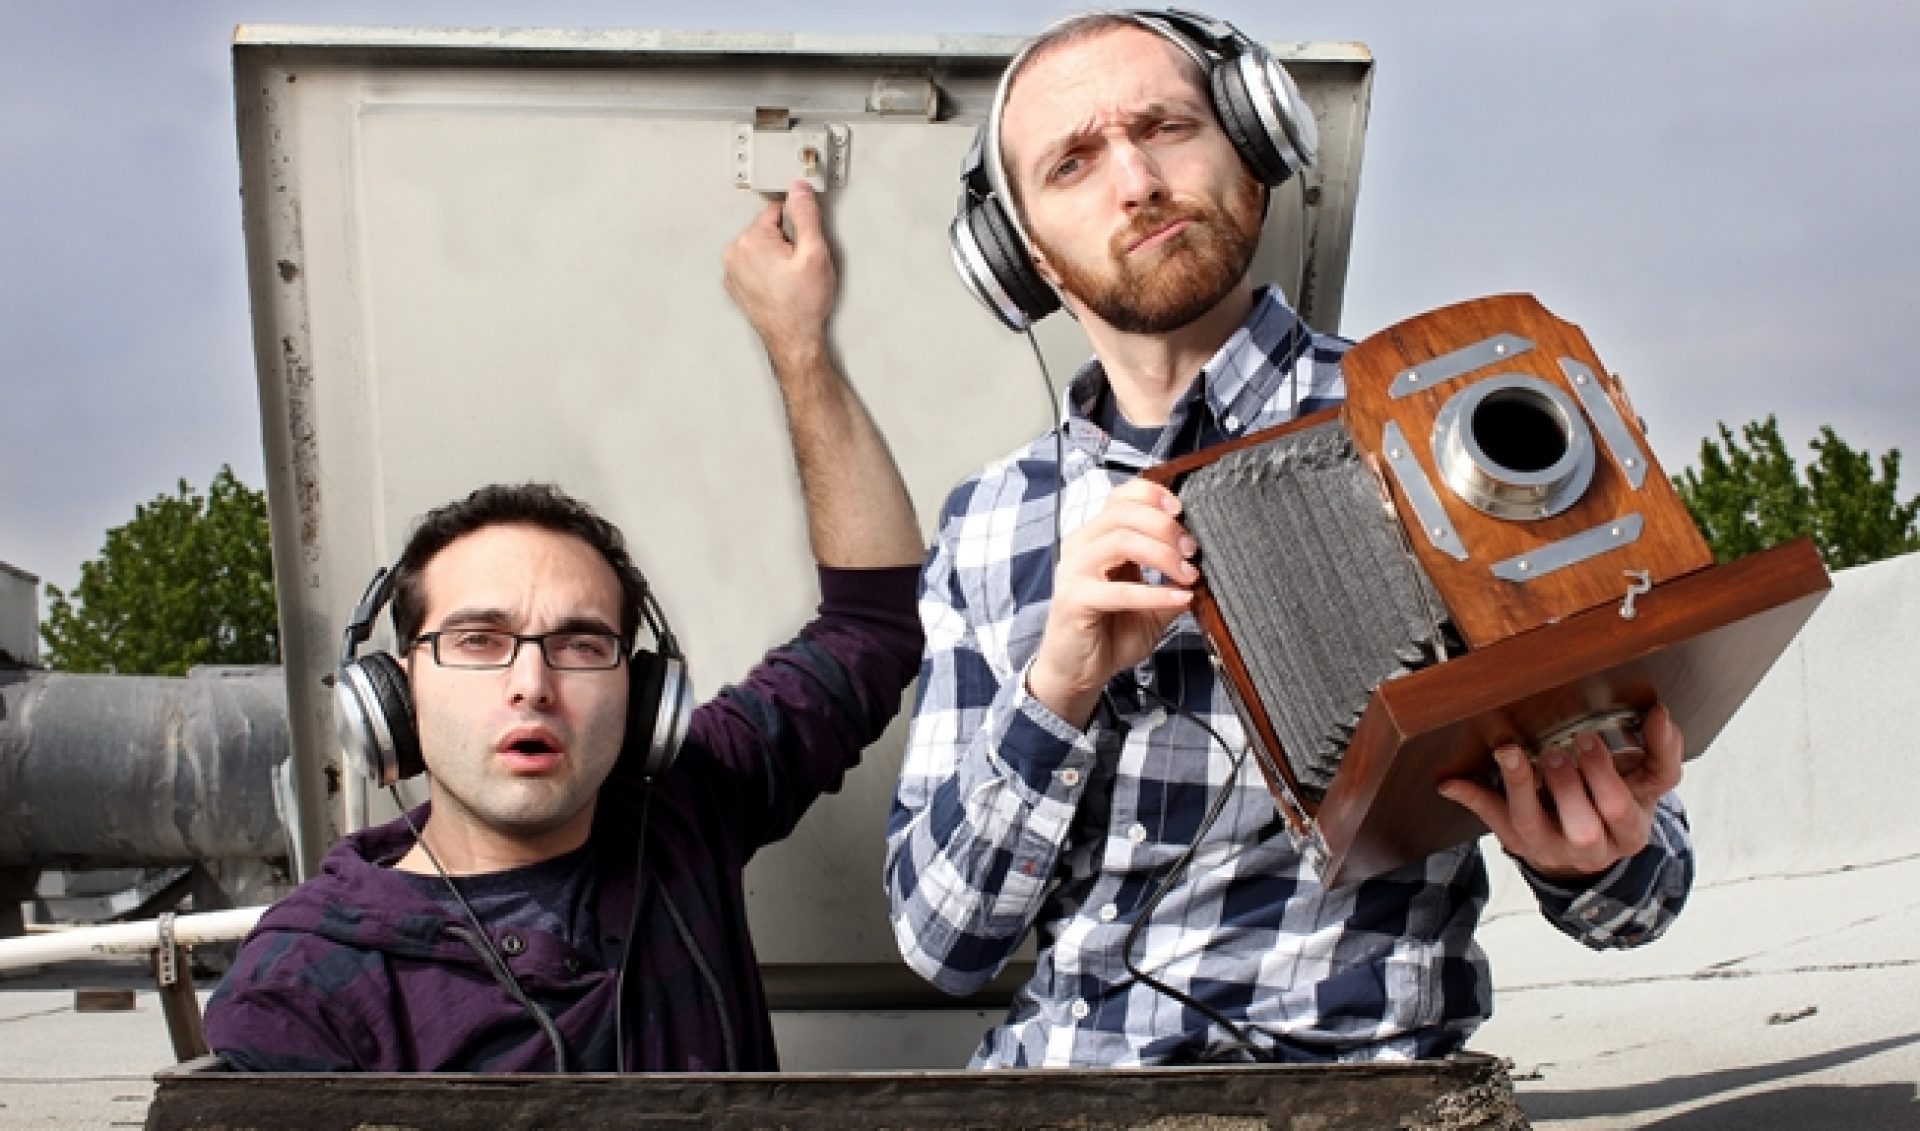 The Fine Bros’ React Channel Gains A Million Subscribers In One Week